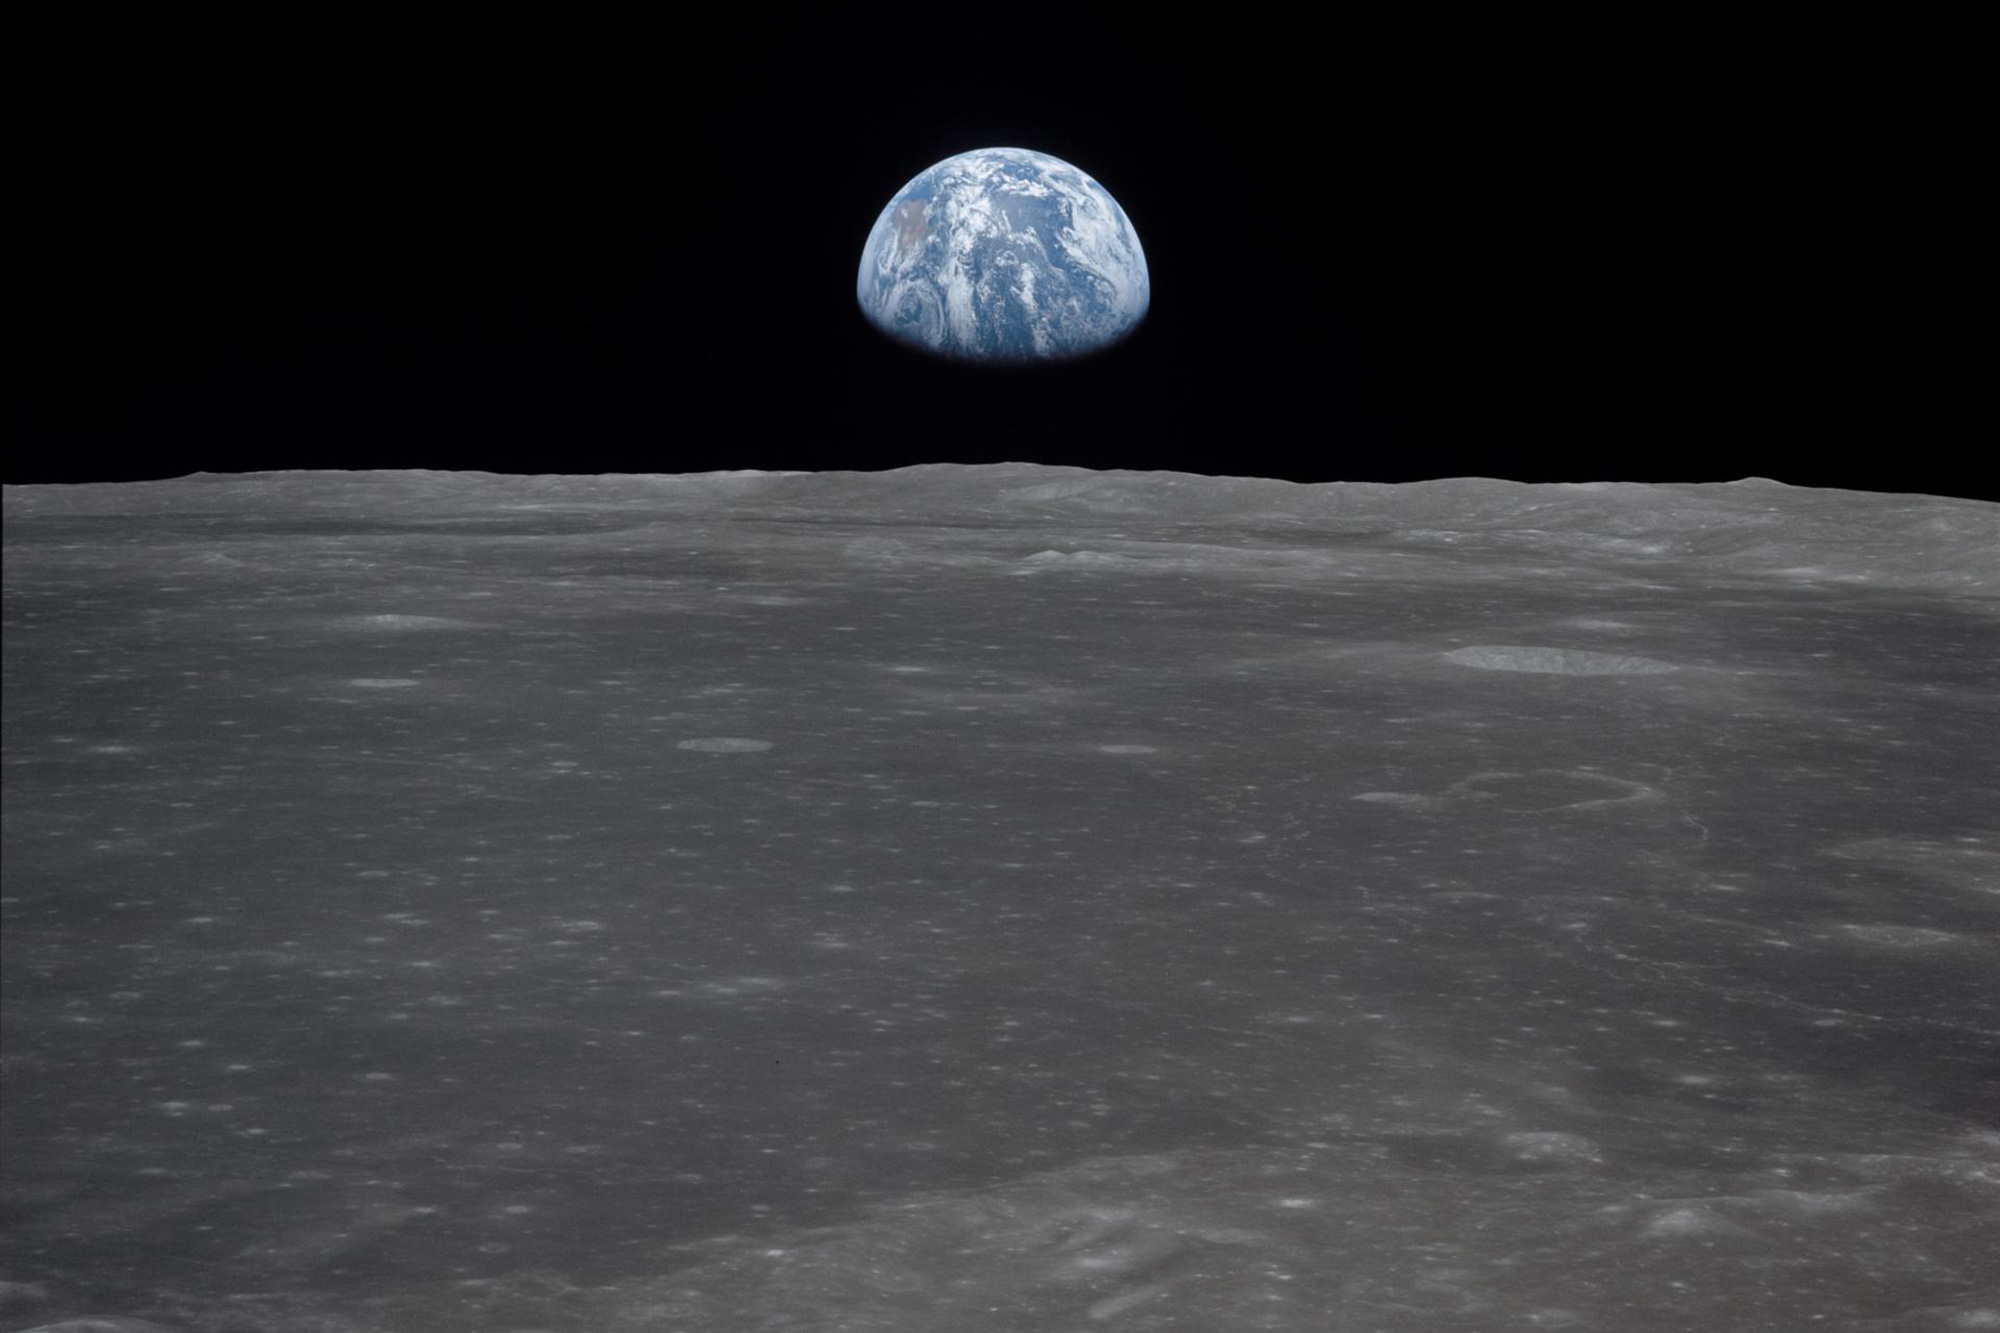 This view from the Apollo 11 spacecraft shows the Earth rising above the moon's horizon, in July 1969.